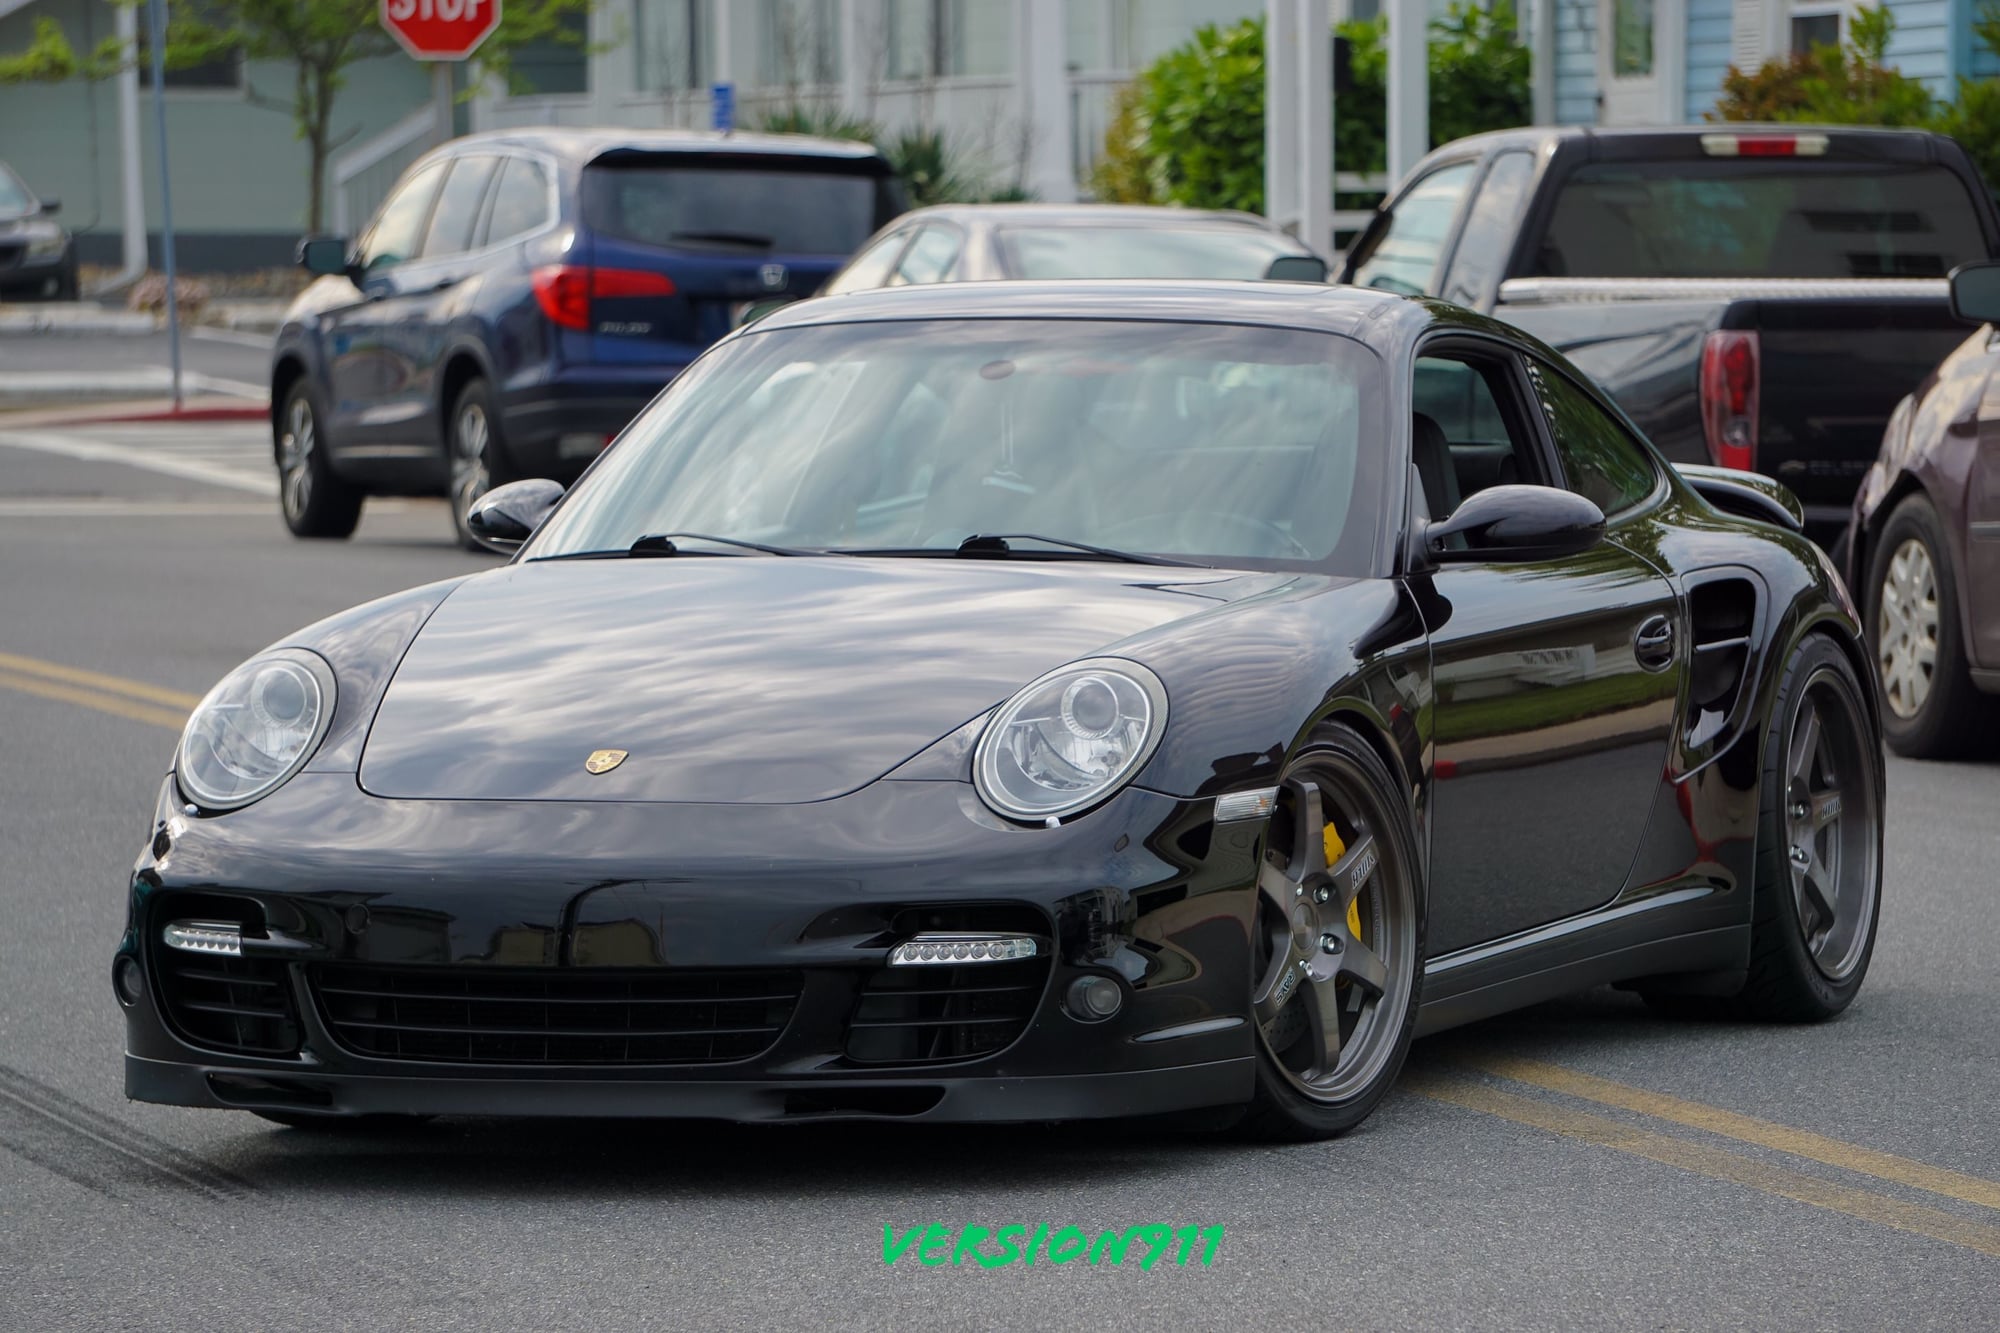 2007 Porsche 911 - 2007 997.1 911 Turbo COUPE / MANUAL - Used - VIN WP0AD29917S785276 - 57,601 Miles - 6 cyl - AWD - Manual - Coupe - Black - Dc, DC 20002, United States